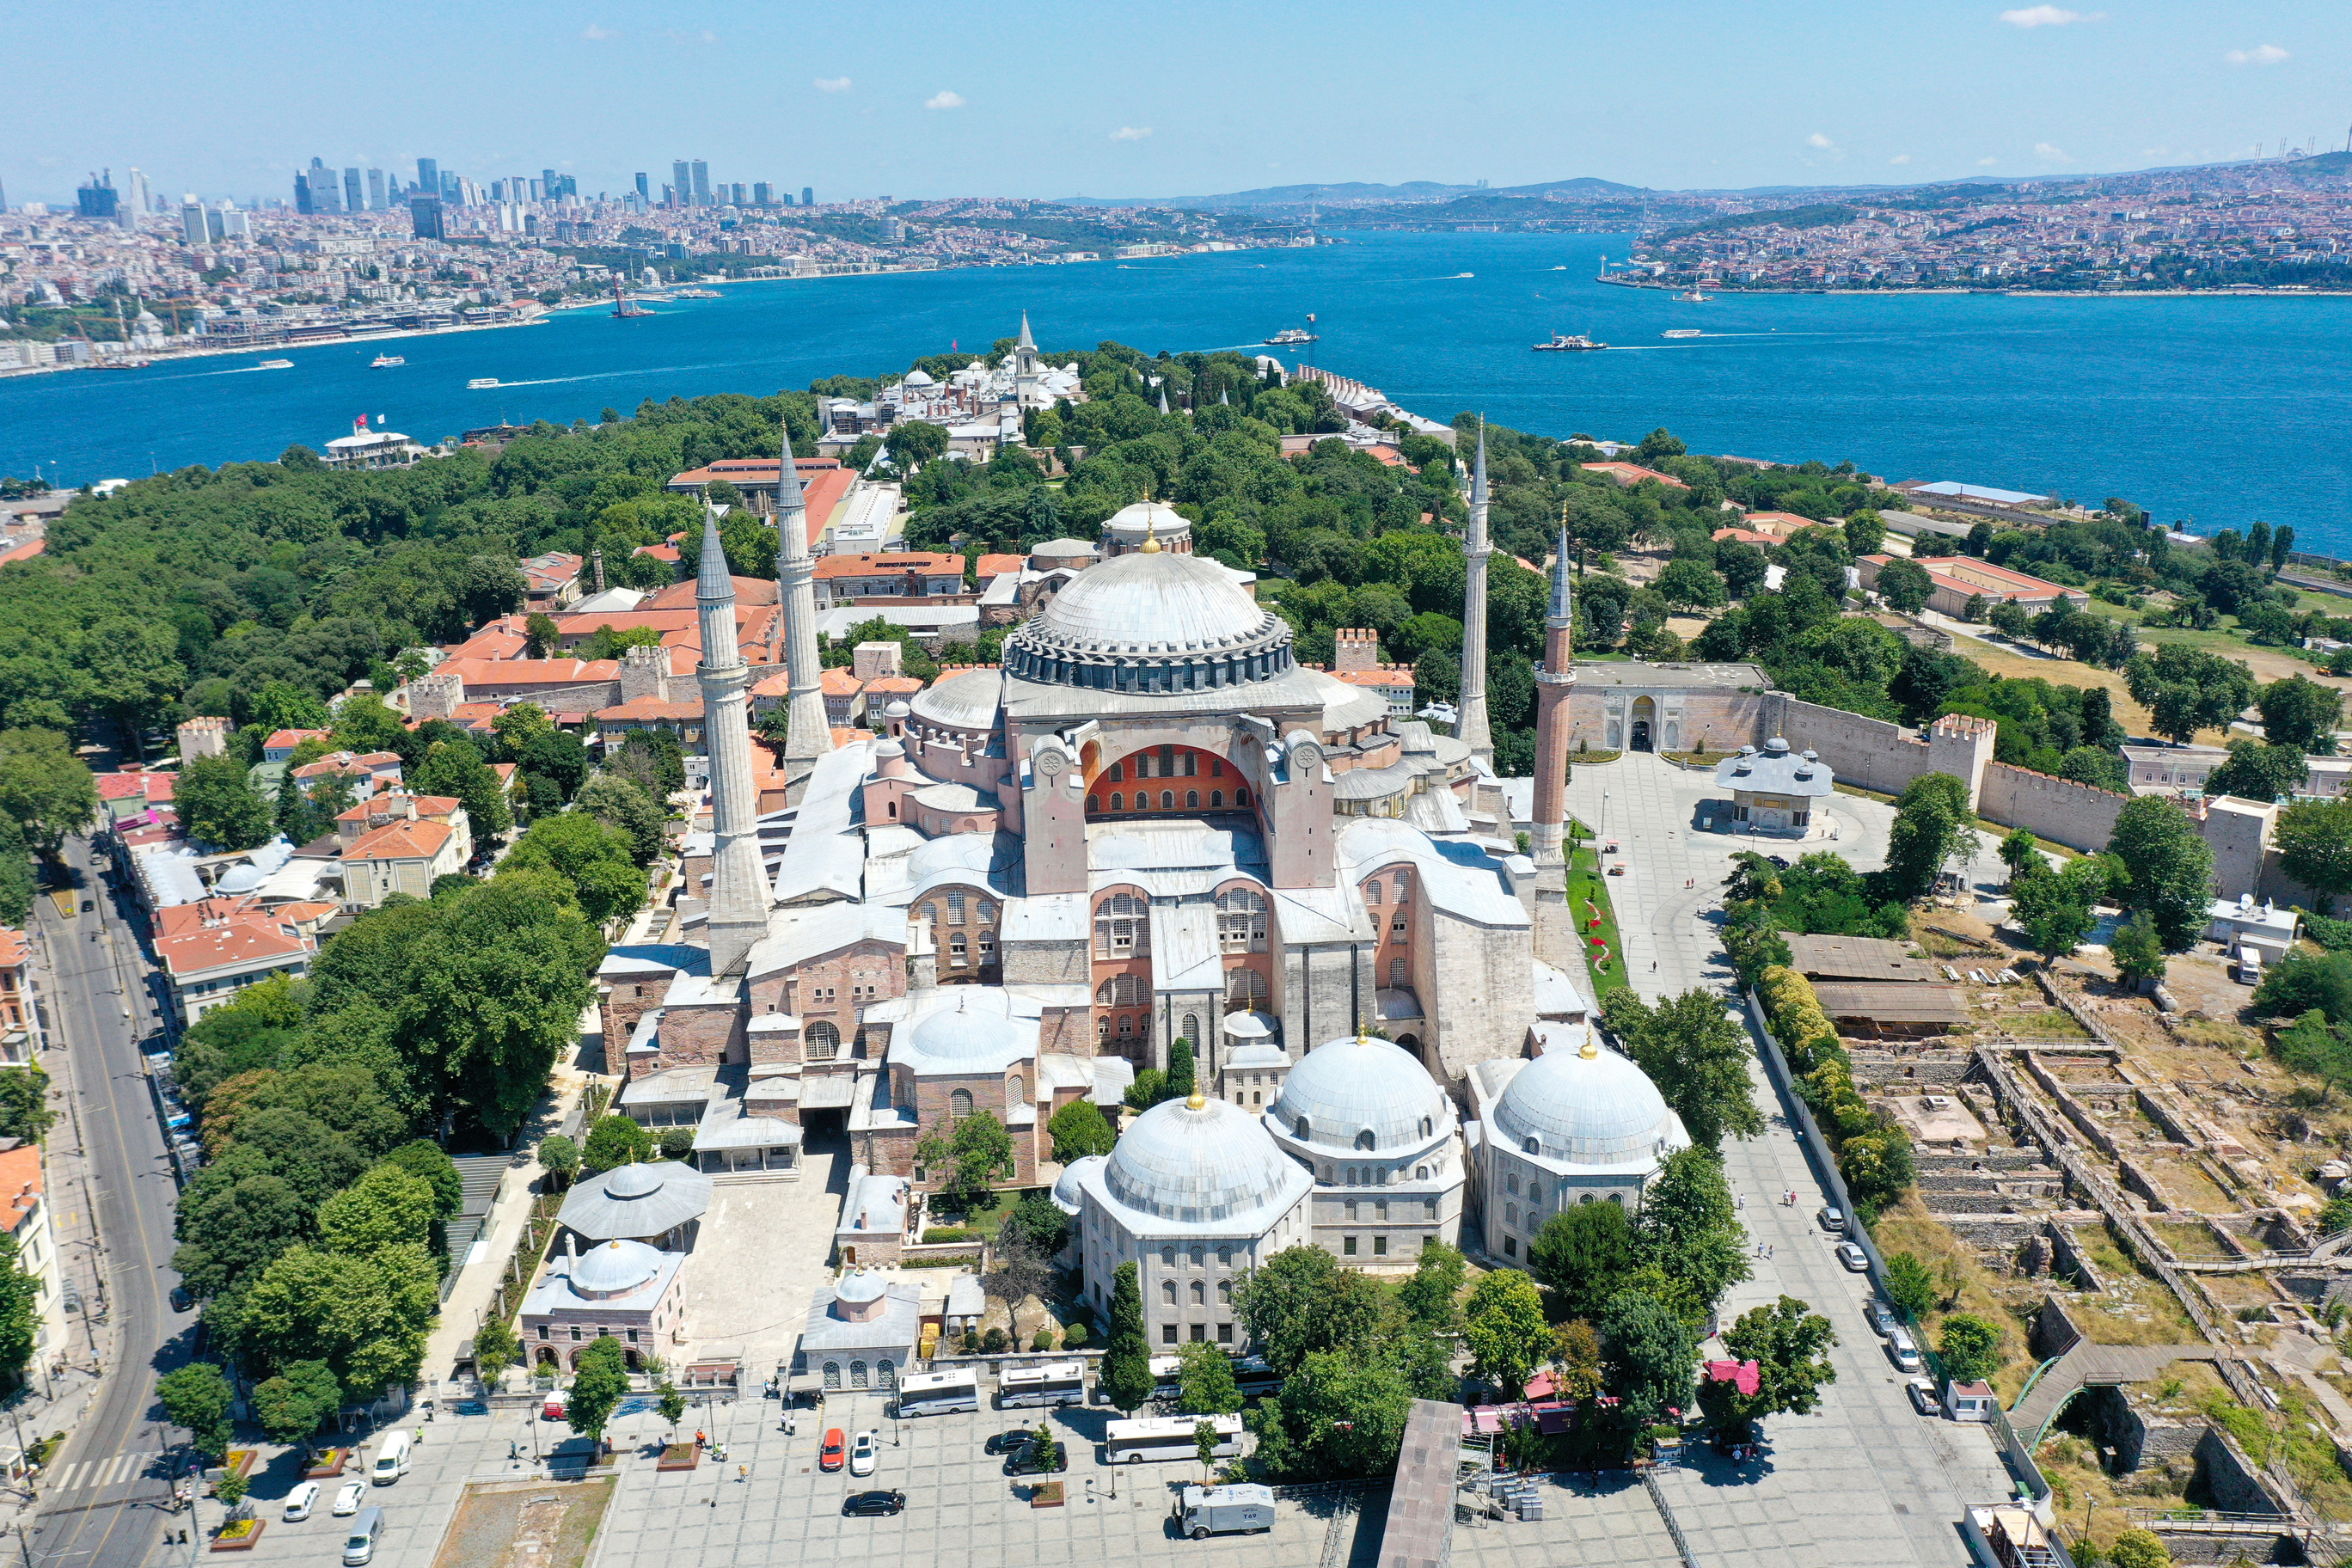 Preparations continue around Hagia Sophia to be opened to worship